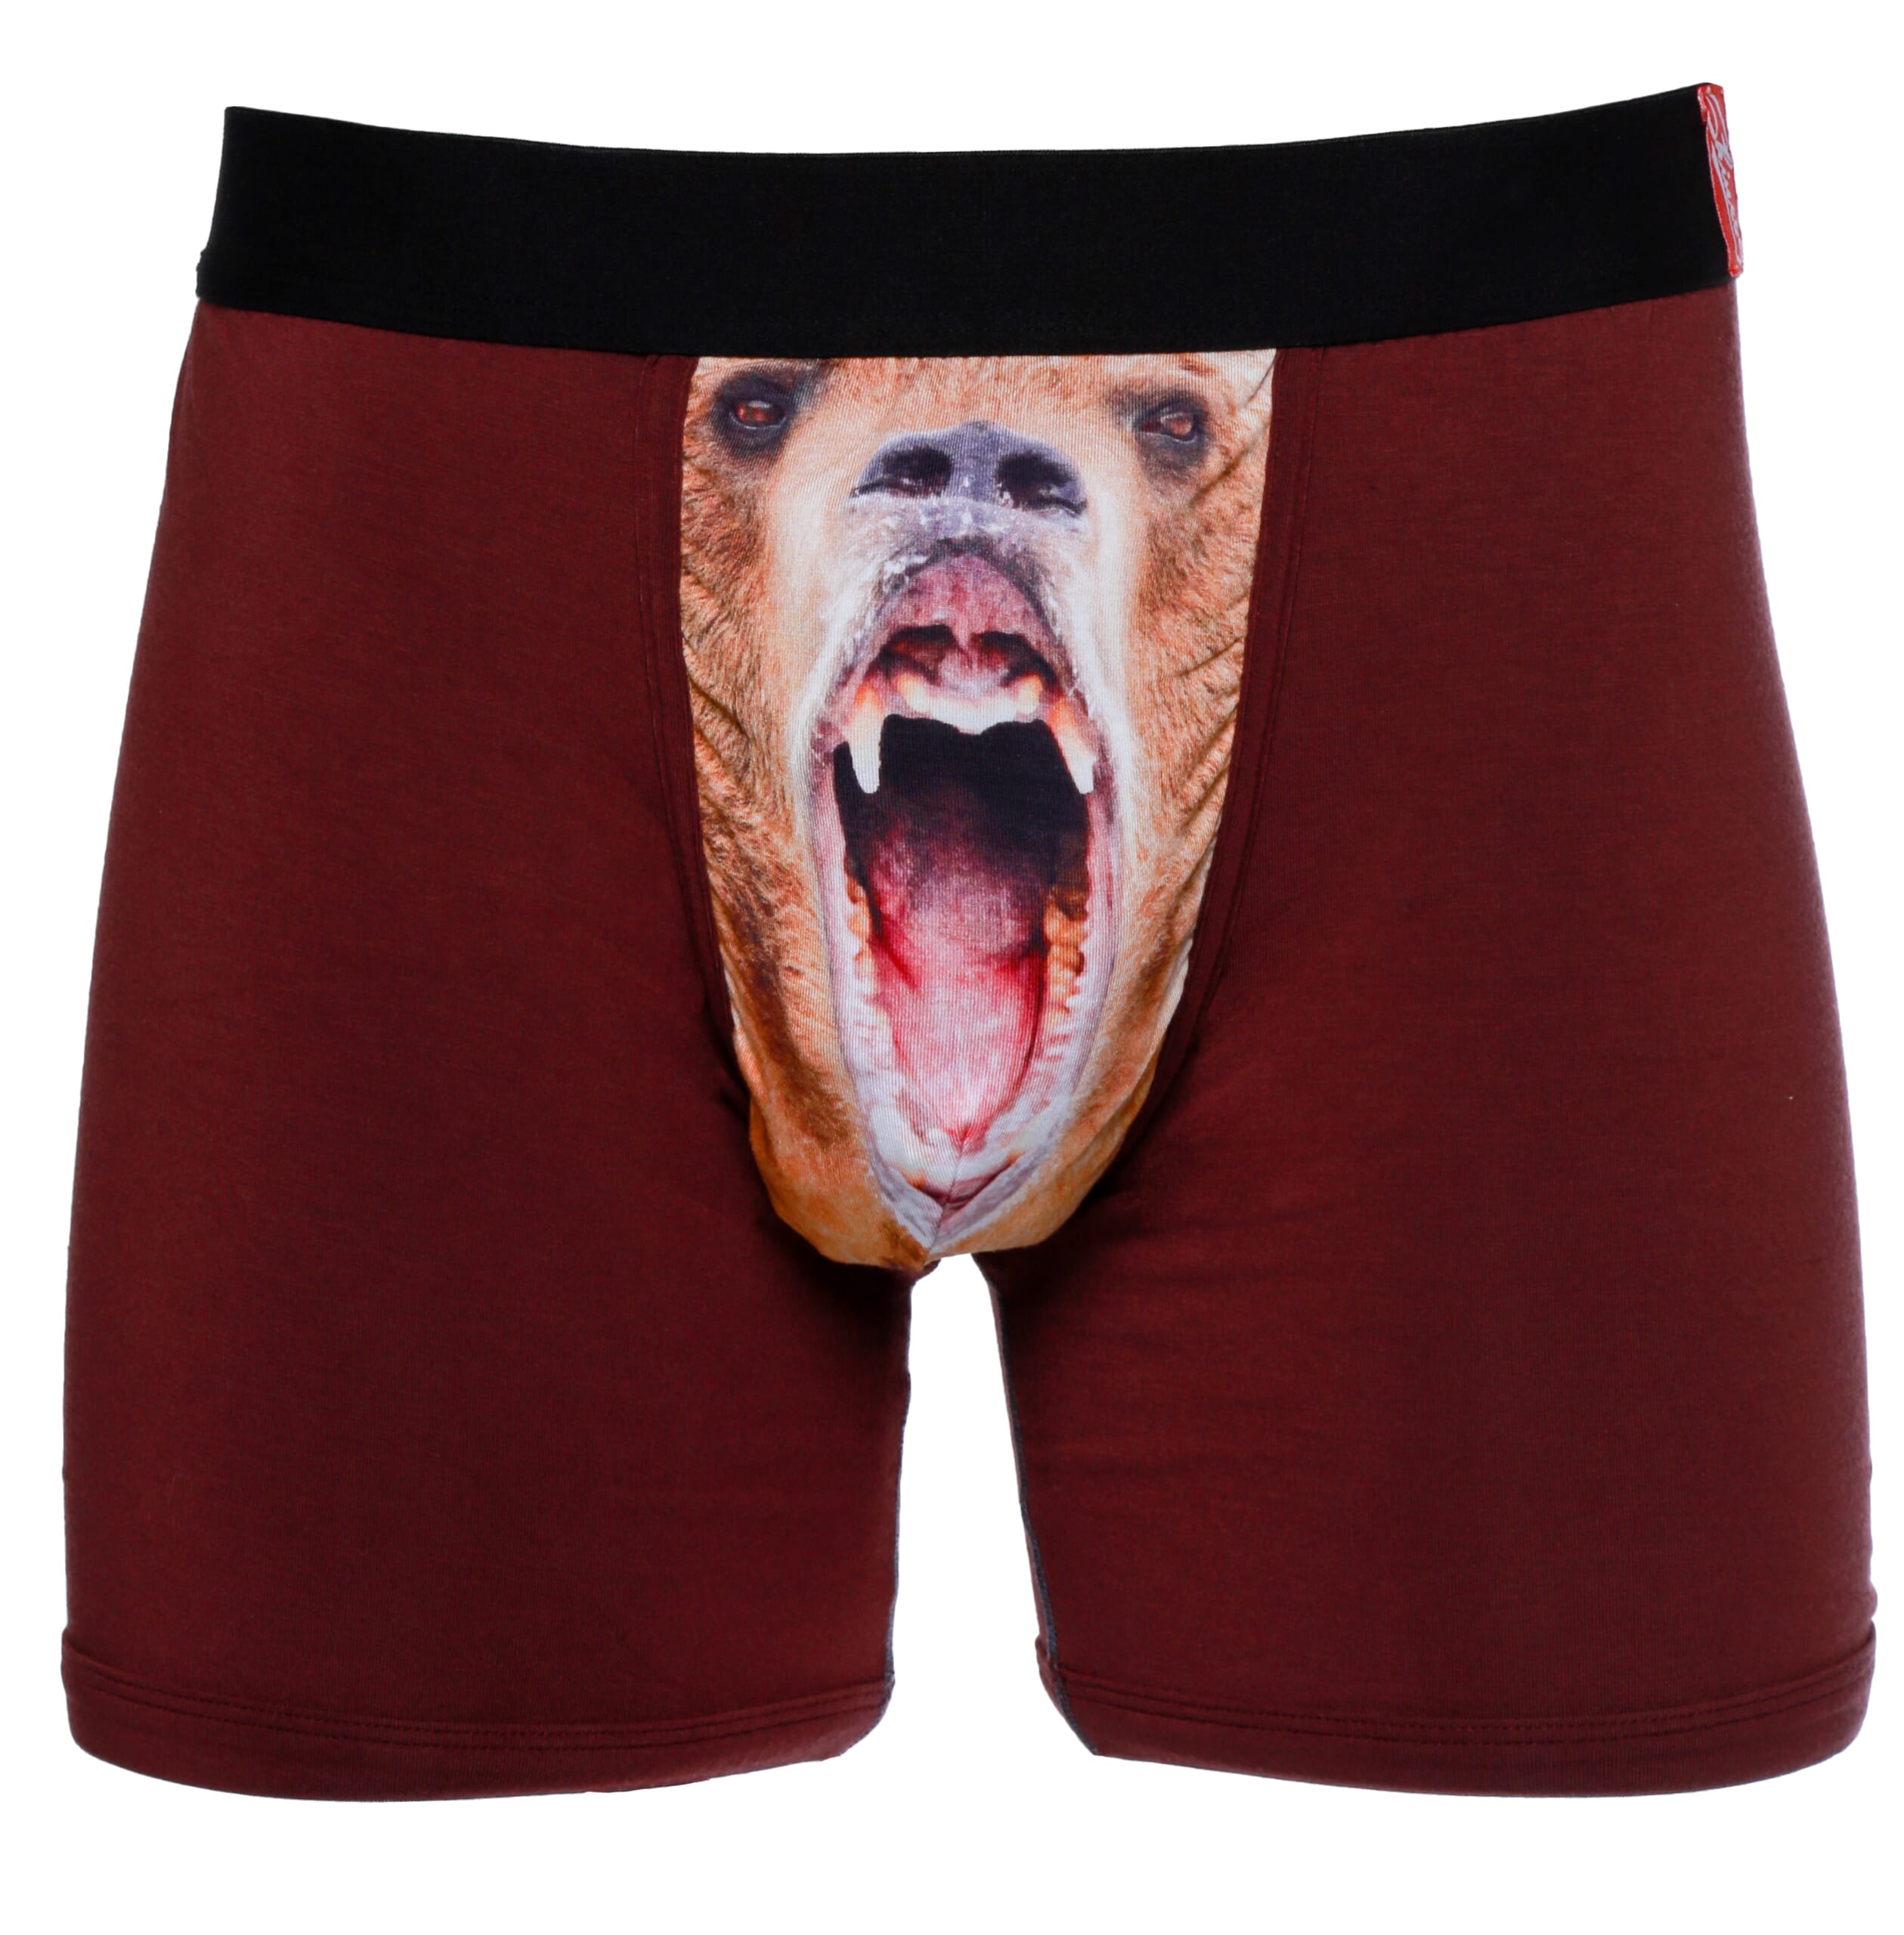 Your Junk Will Look Beastly In These Wild Animal Print Boxer